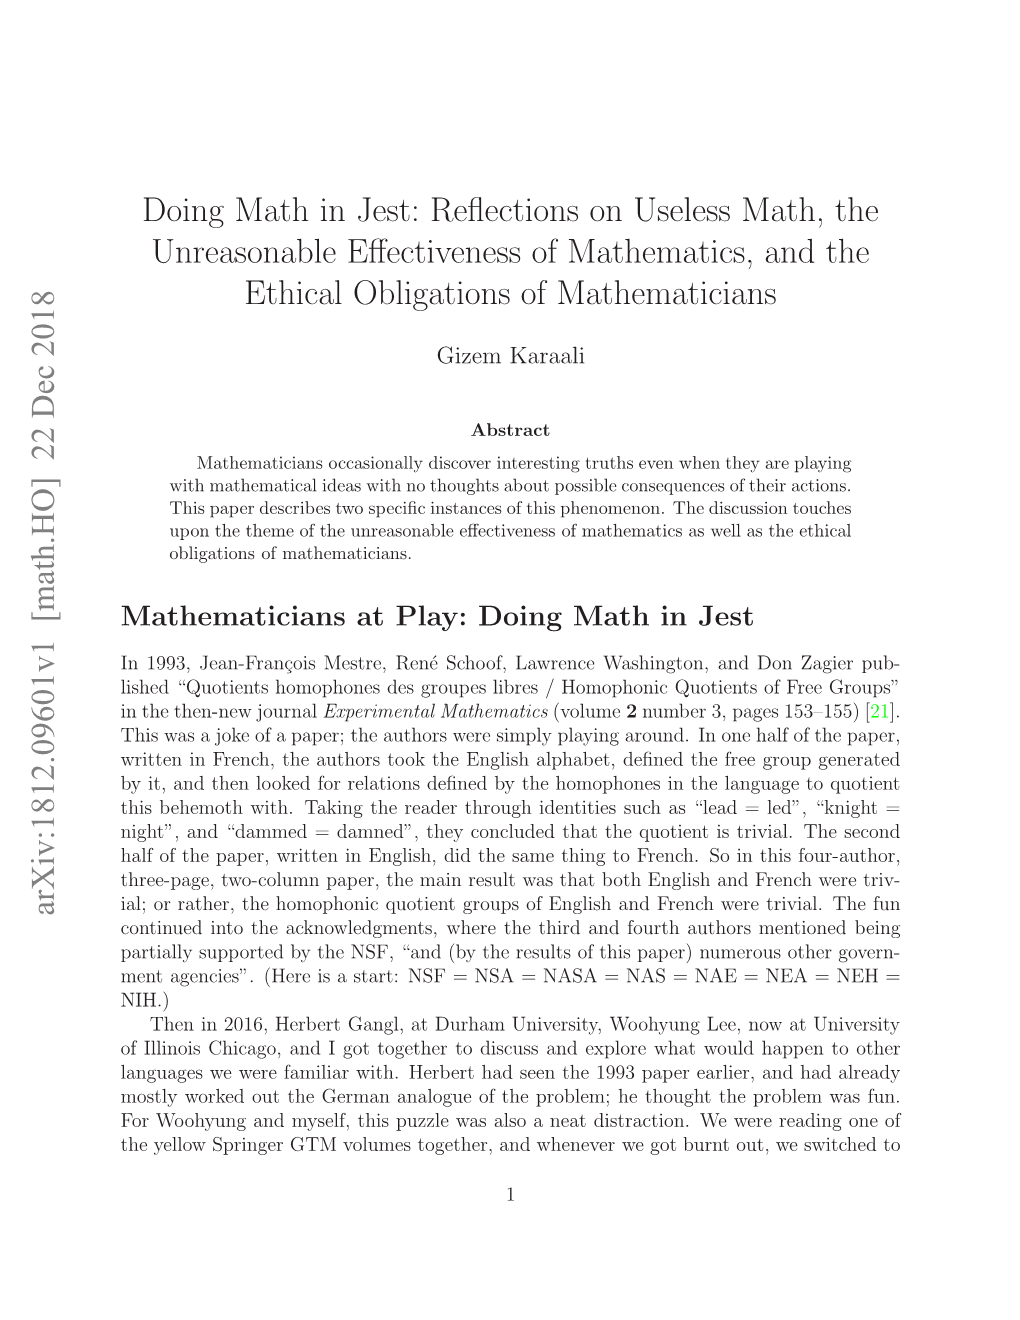 Doing Math in Jest: Reflections on Useless Math, the Unreasonable Effectiveness of Mathematics, and the Ethical Obligations of Mathematicians